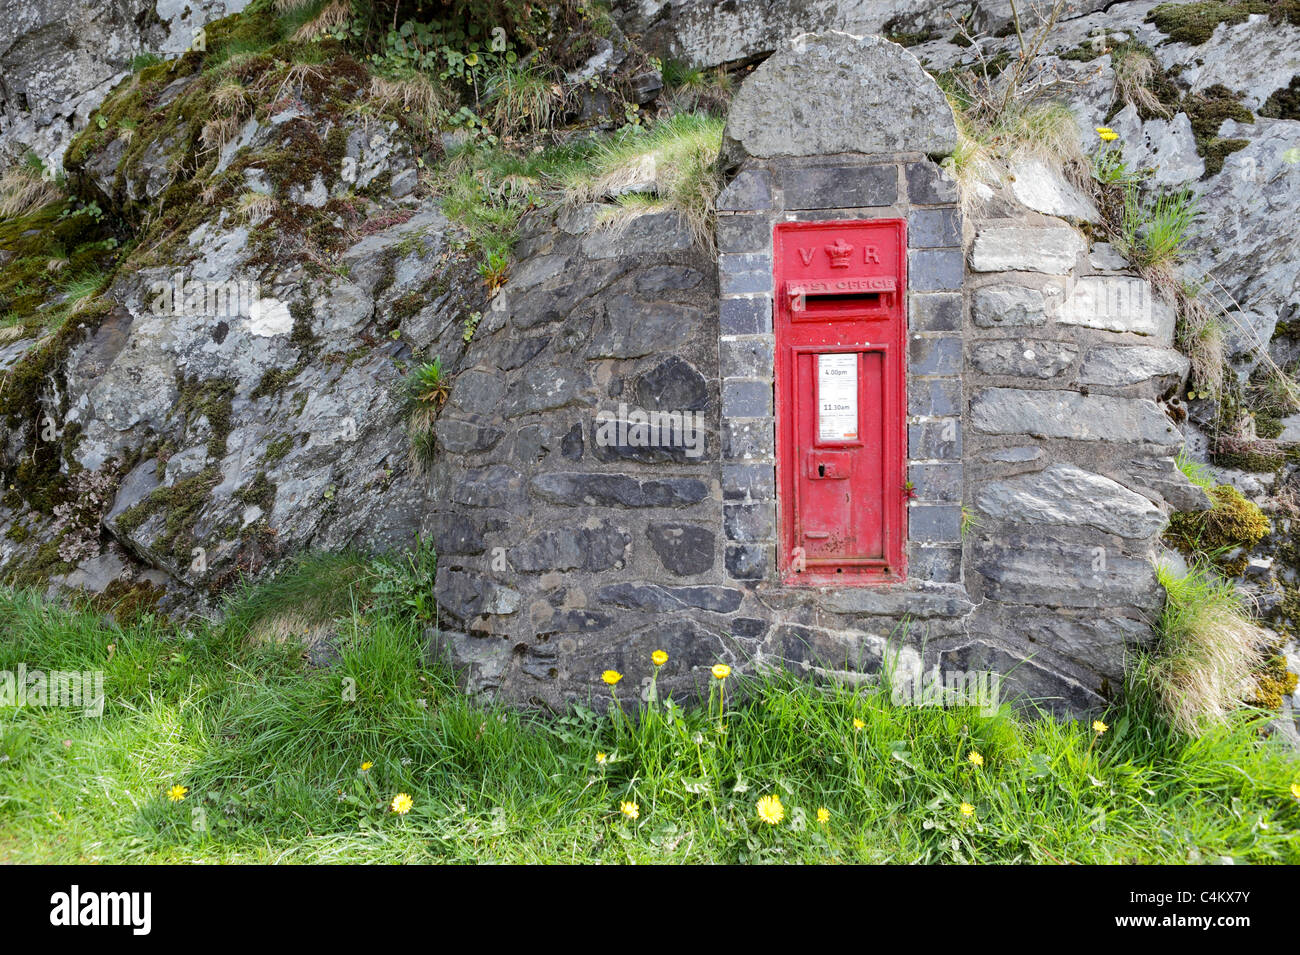 RED LETTER BOX, an relic from the Victorian era, this particular form of letter boxes were to be found in rural and remote areas. Stock Photo